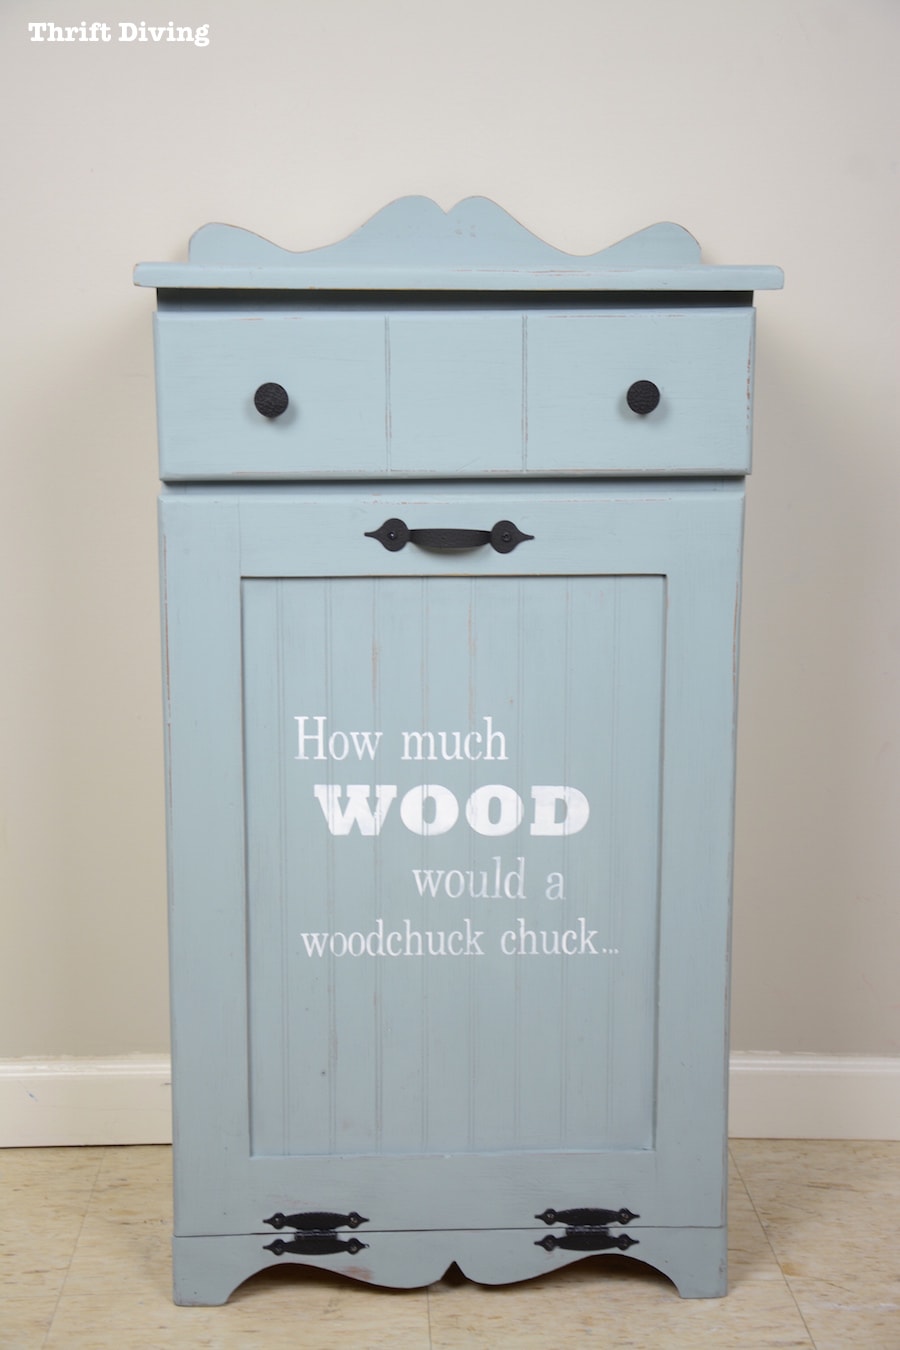 Wooden Trash Can - Pretty AFTER furniture makeover! - Thrift Diving